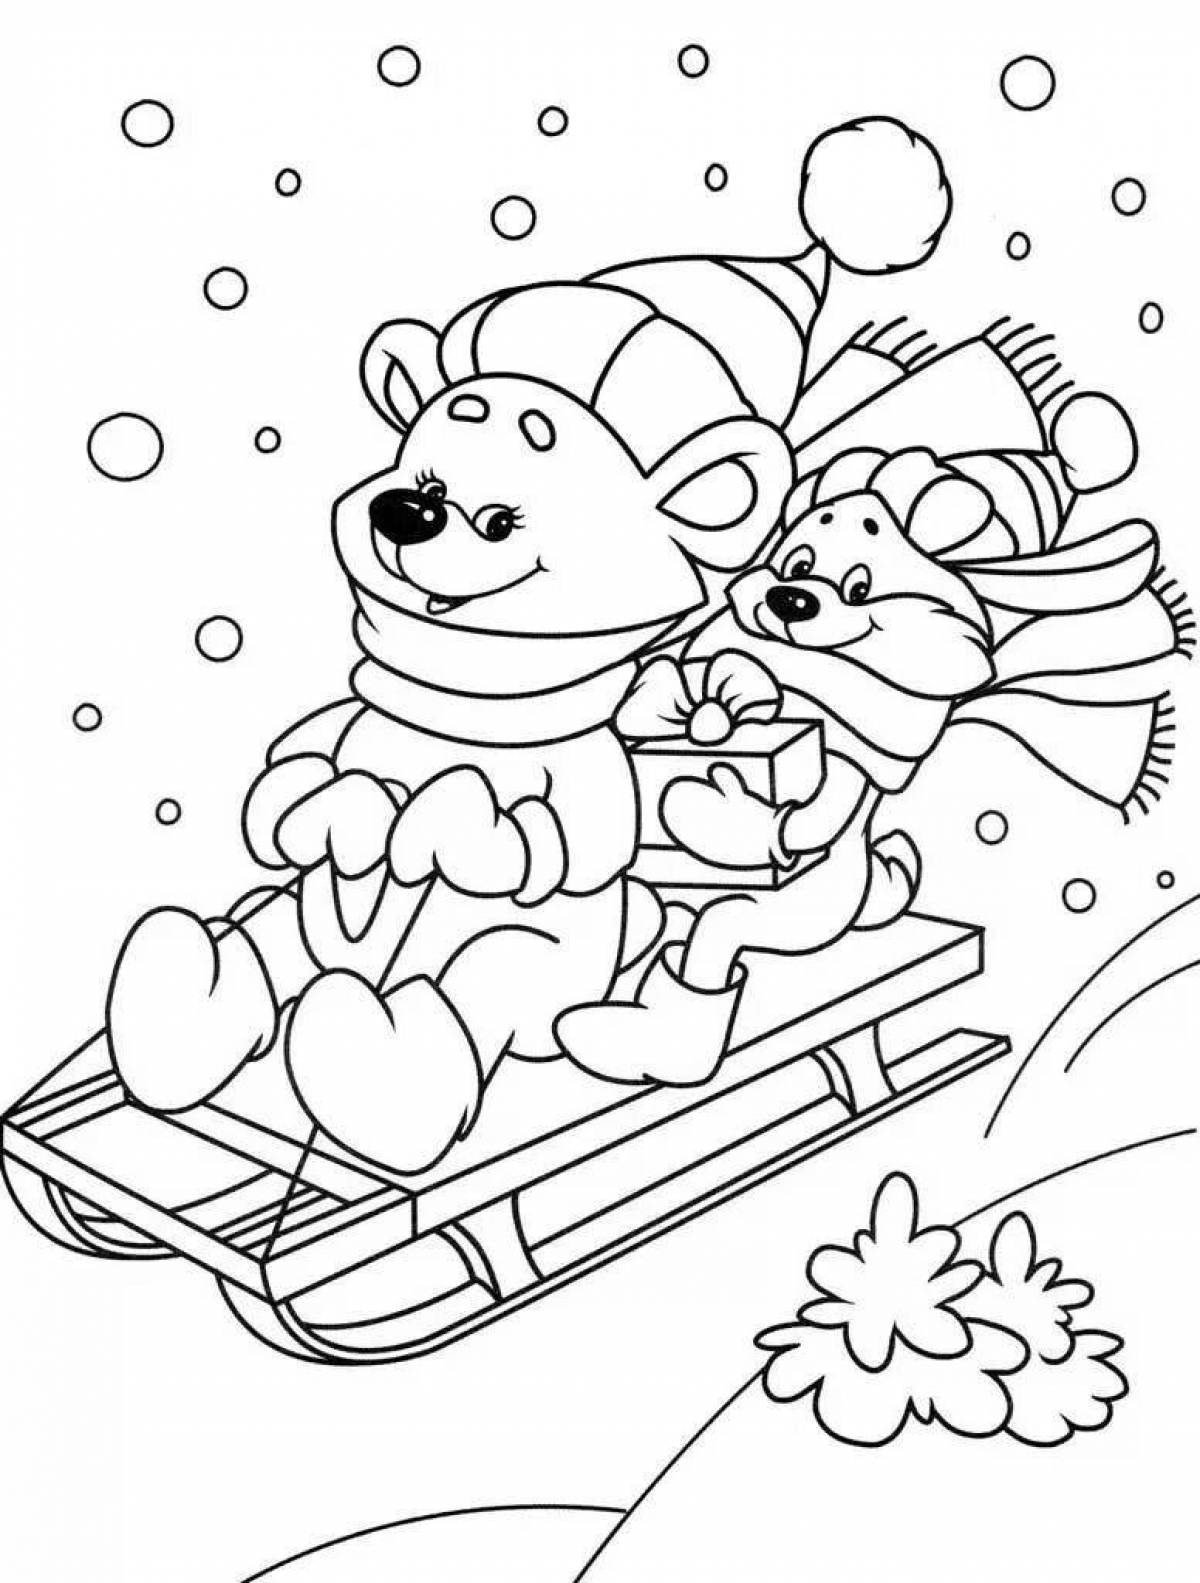 Holiday coloring book winter for children 4 years old